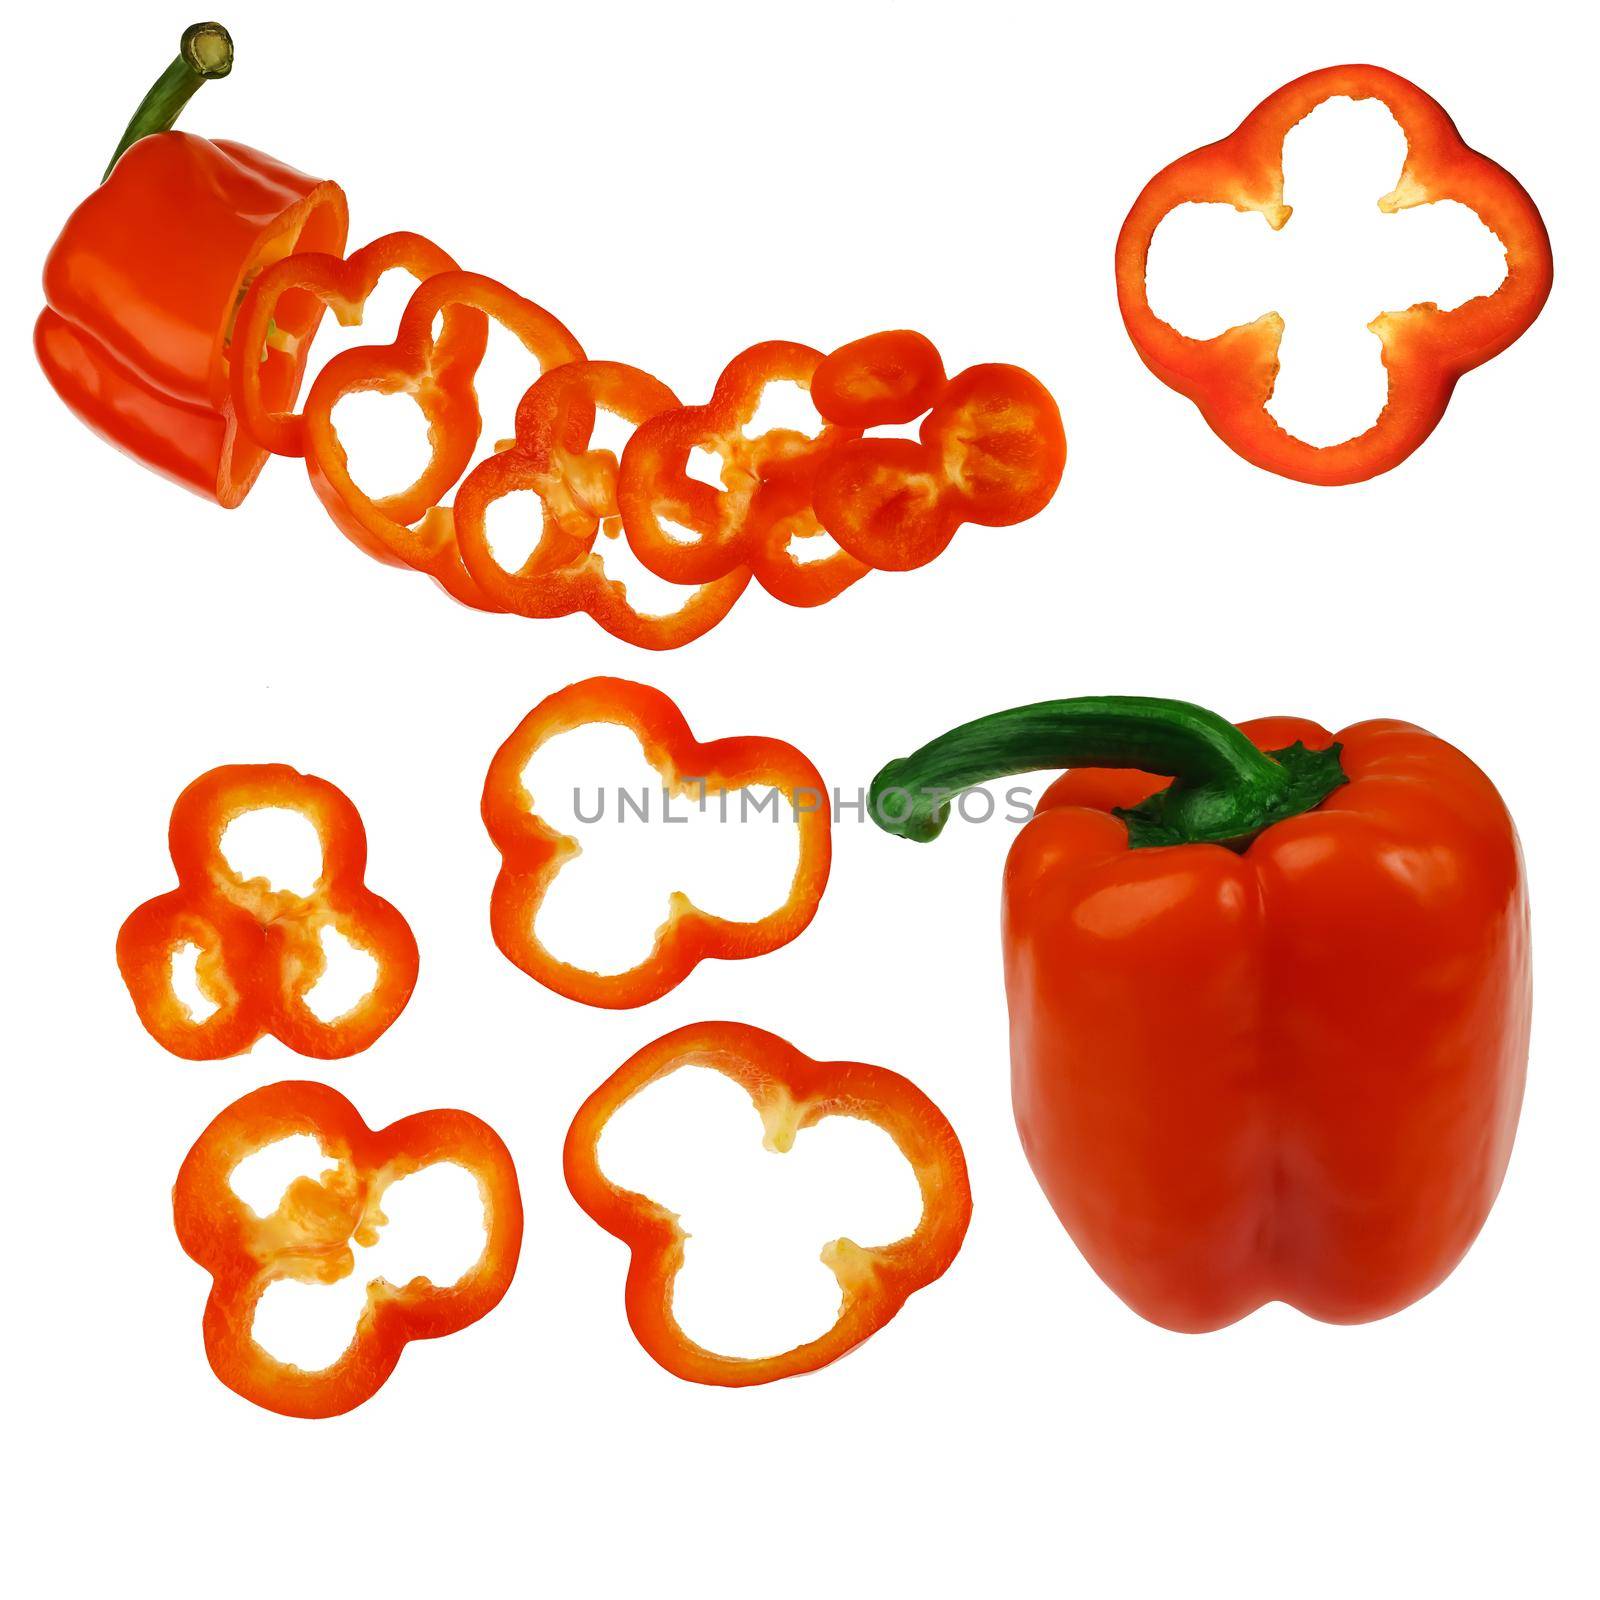 ripe sweet red pepper, cut into pieces and whole, on a white background in isolation, collage by A_A